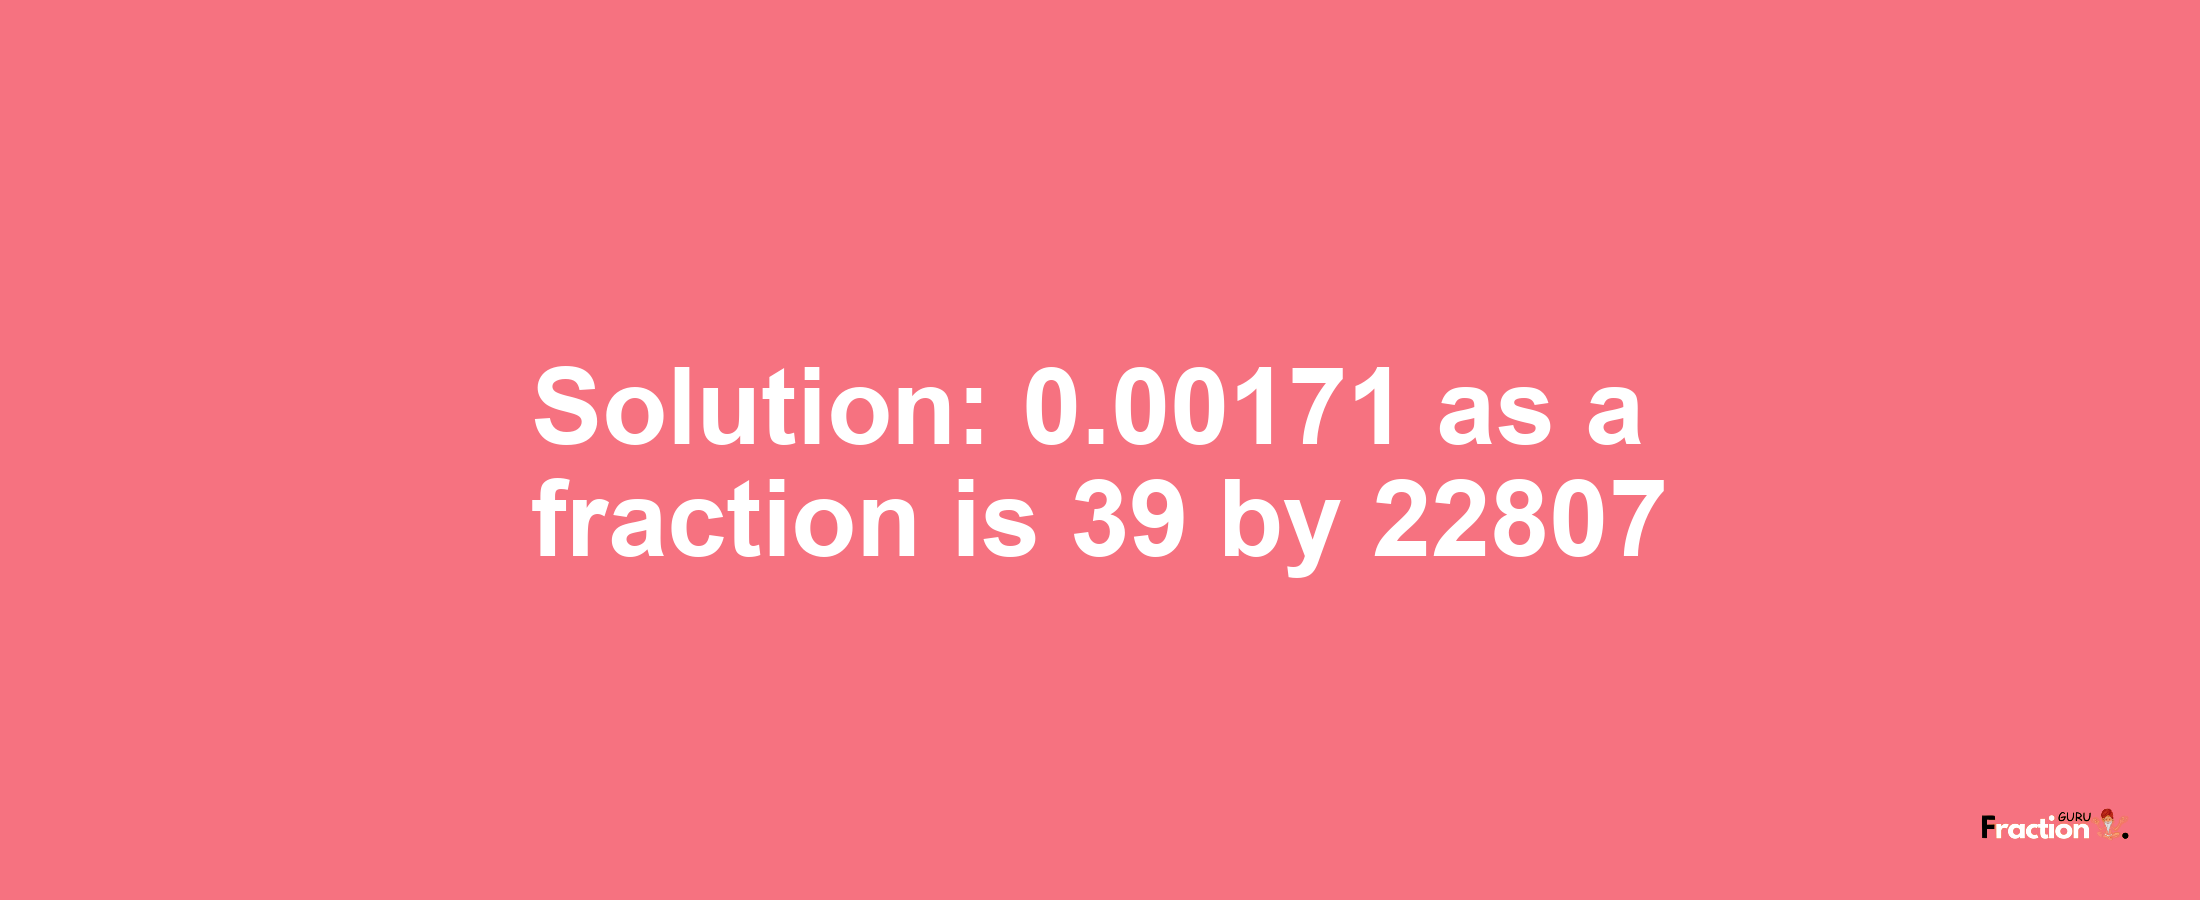 Solution:0.00171 as a fraction is 39/22807